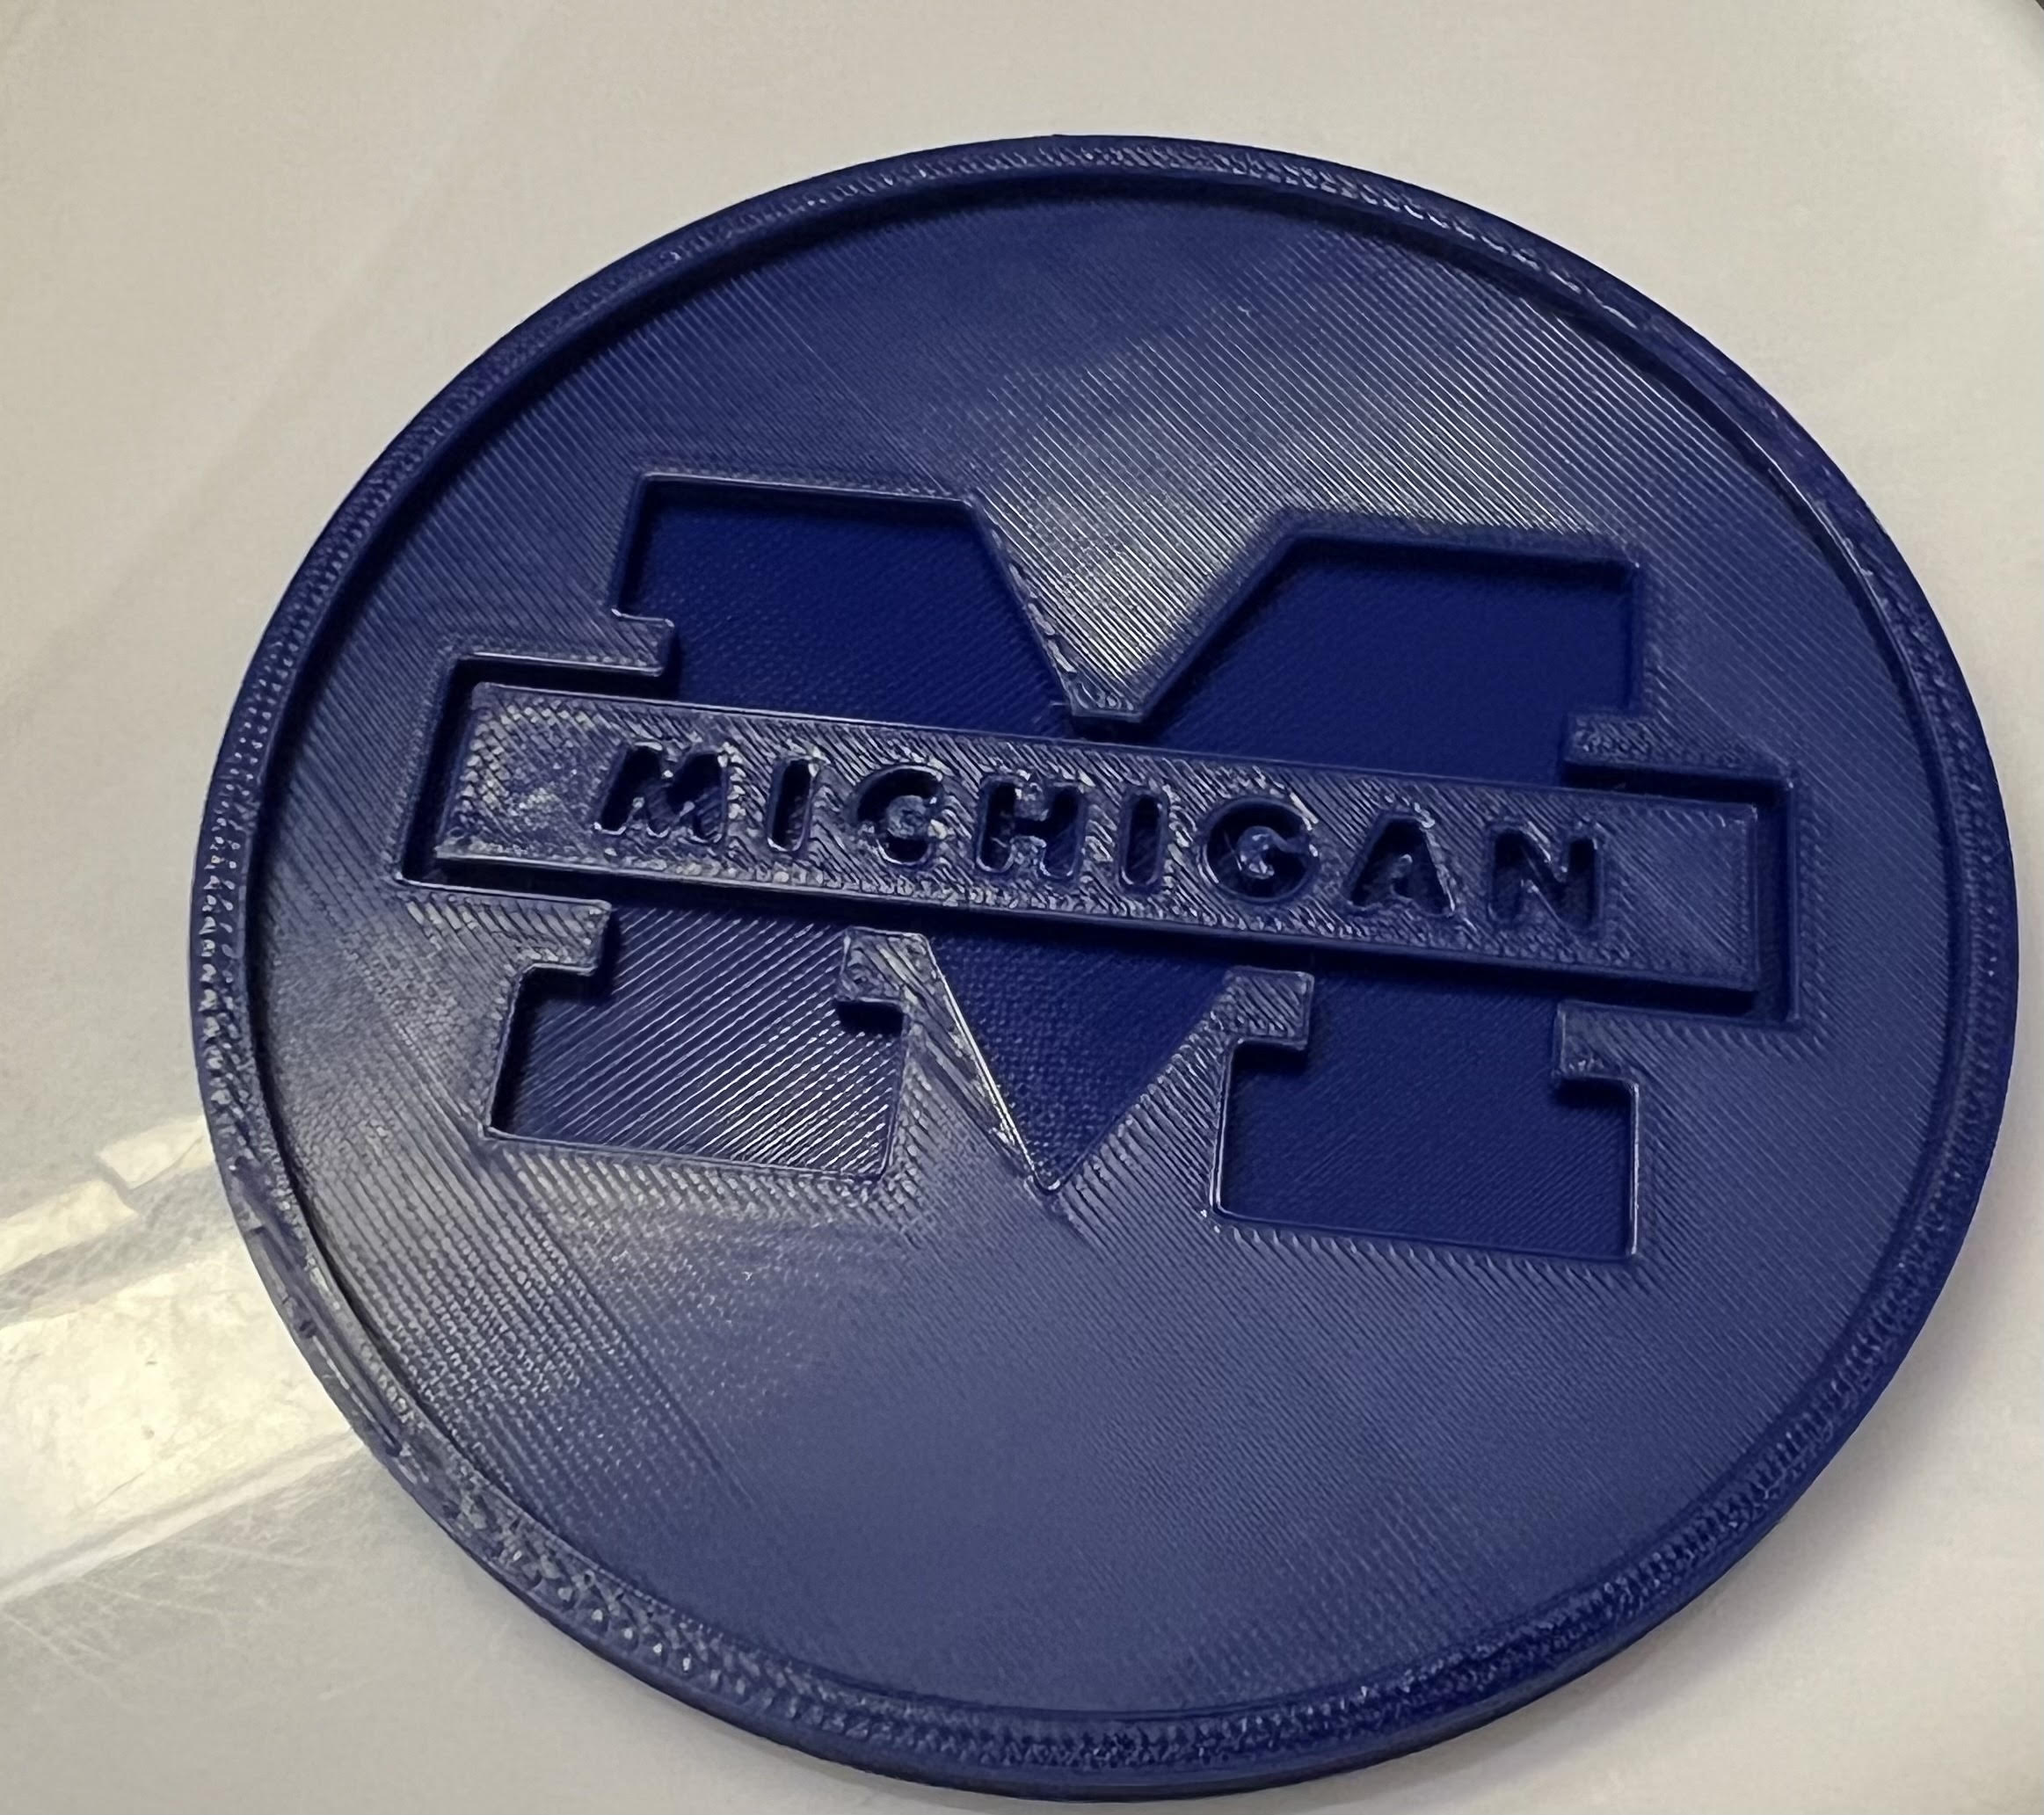 Navy blue 3D printed circular cup coaster with the Michigan logo in the center